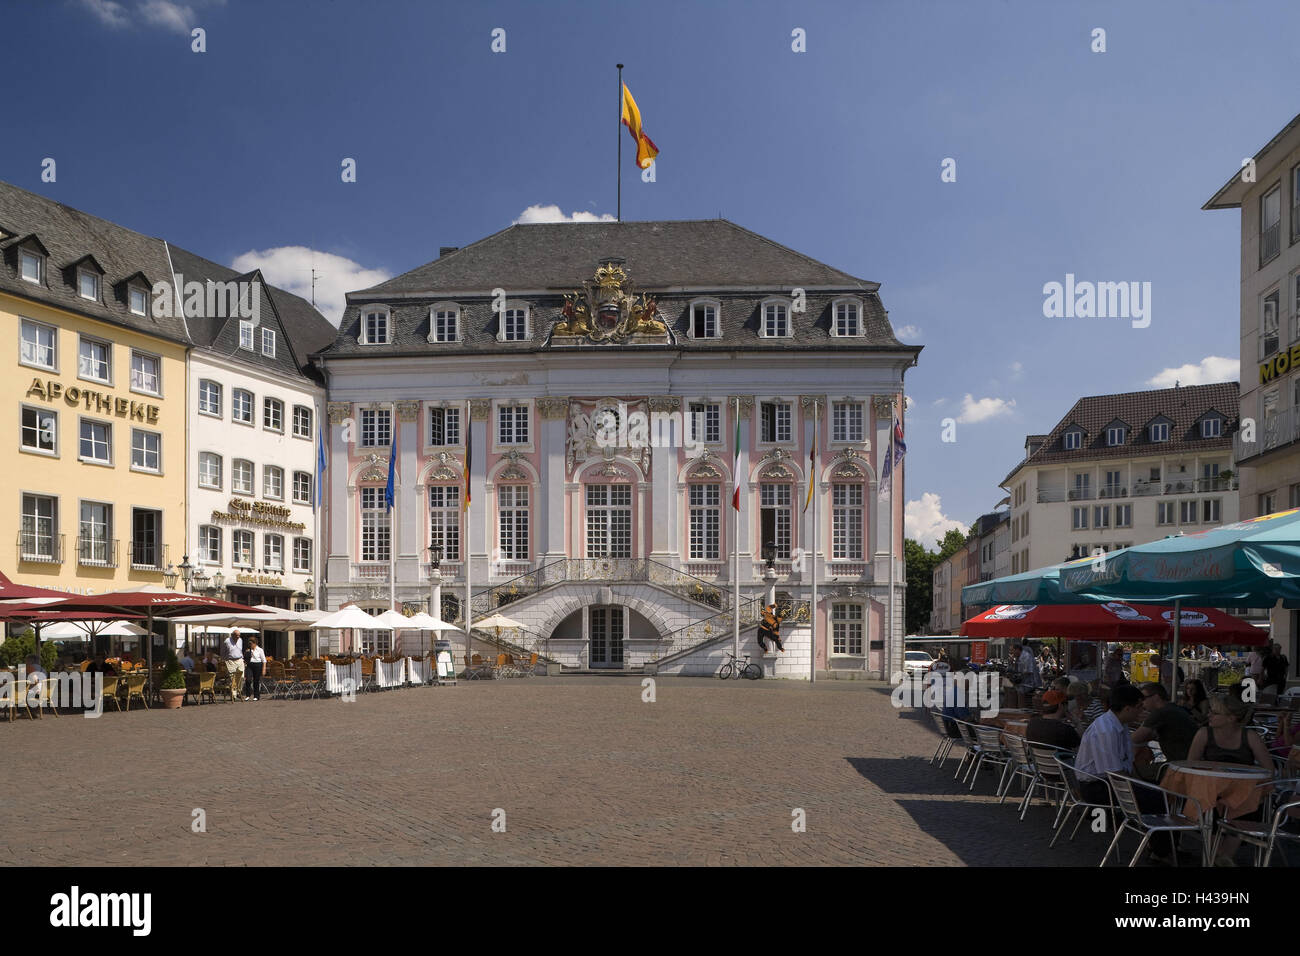 Germany, North Rhine-Westphalia, Bonn, marketplace, city hall, town, centre, building, houses, facades, city hall facade, baroque, flag, place of interest, space, cafe, street cafe, townscape, Stock Photo